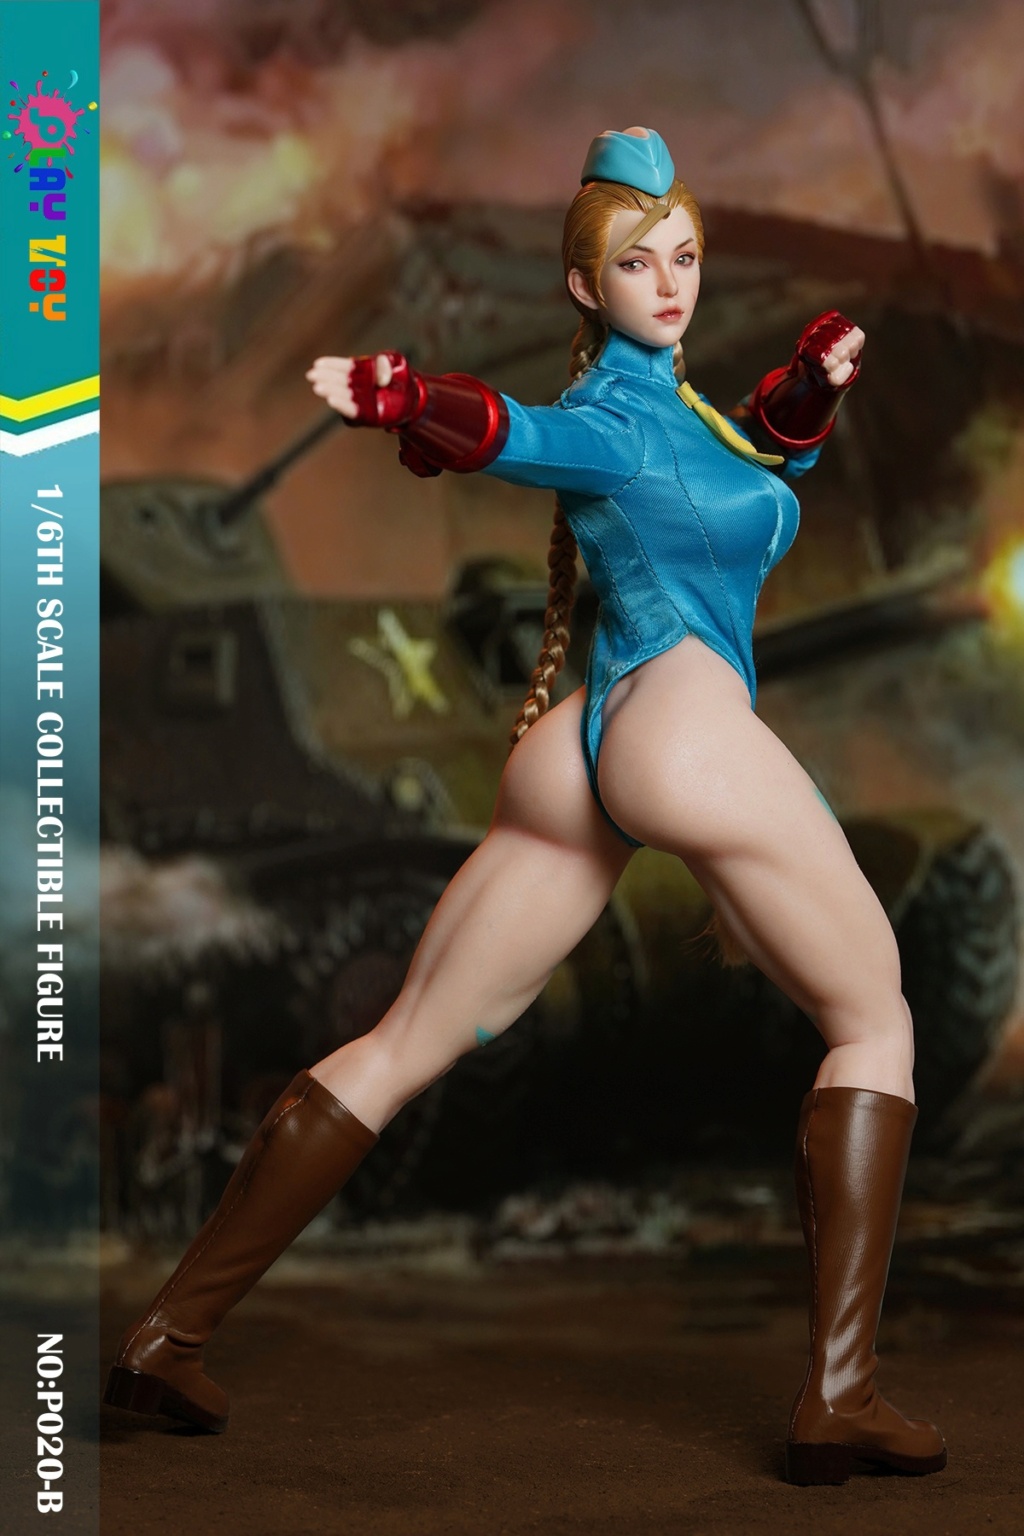 Female - NEW PRODUCT: Play Toy: P020 1/6 Scale Female Fighter in 2 styles 11442511